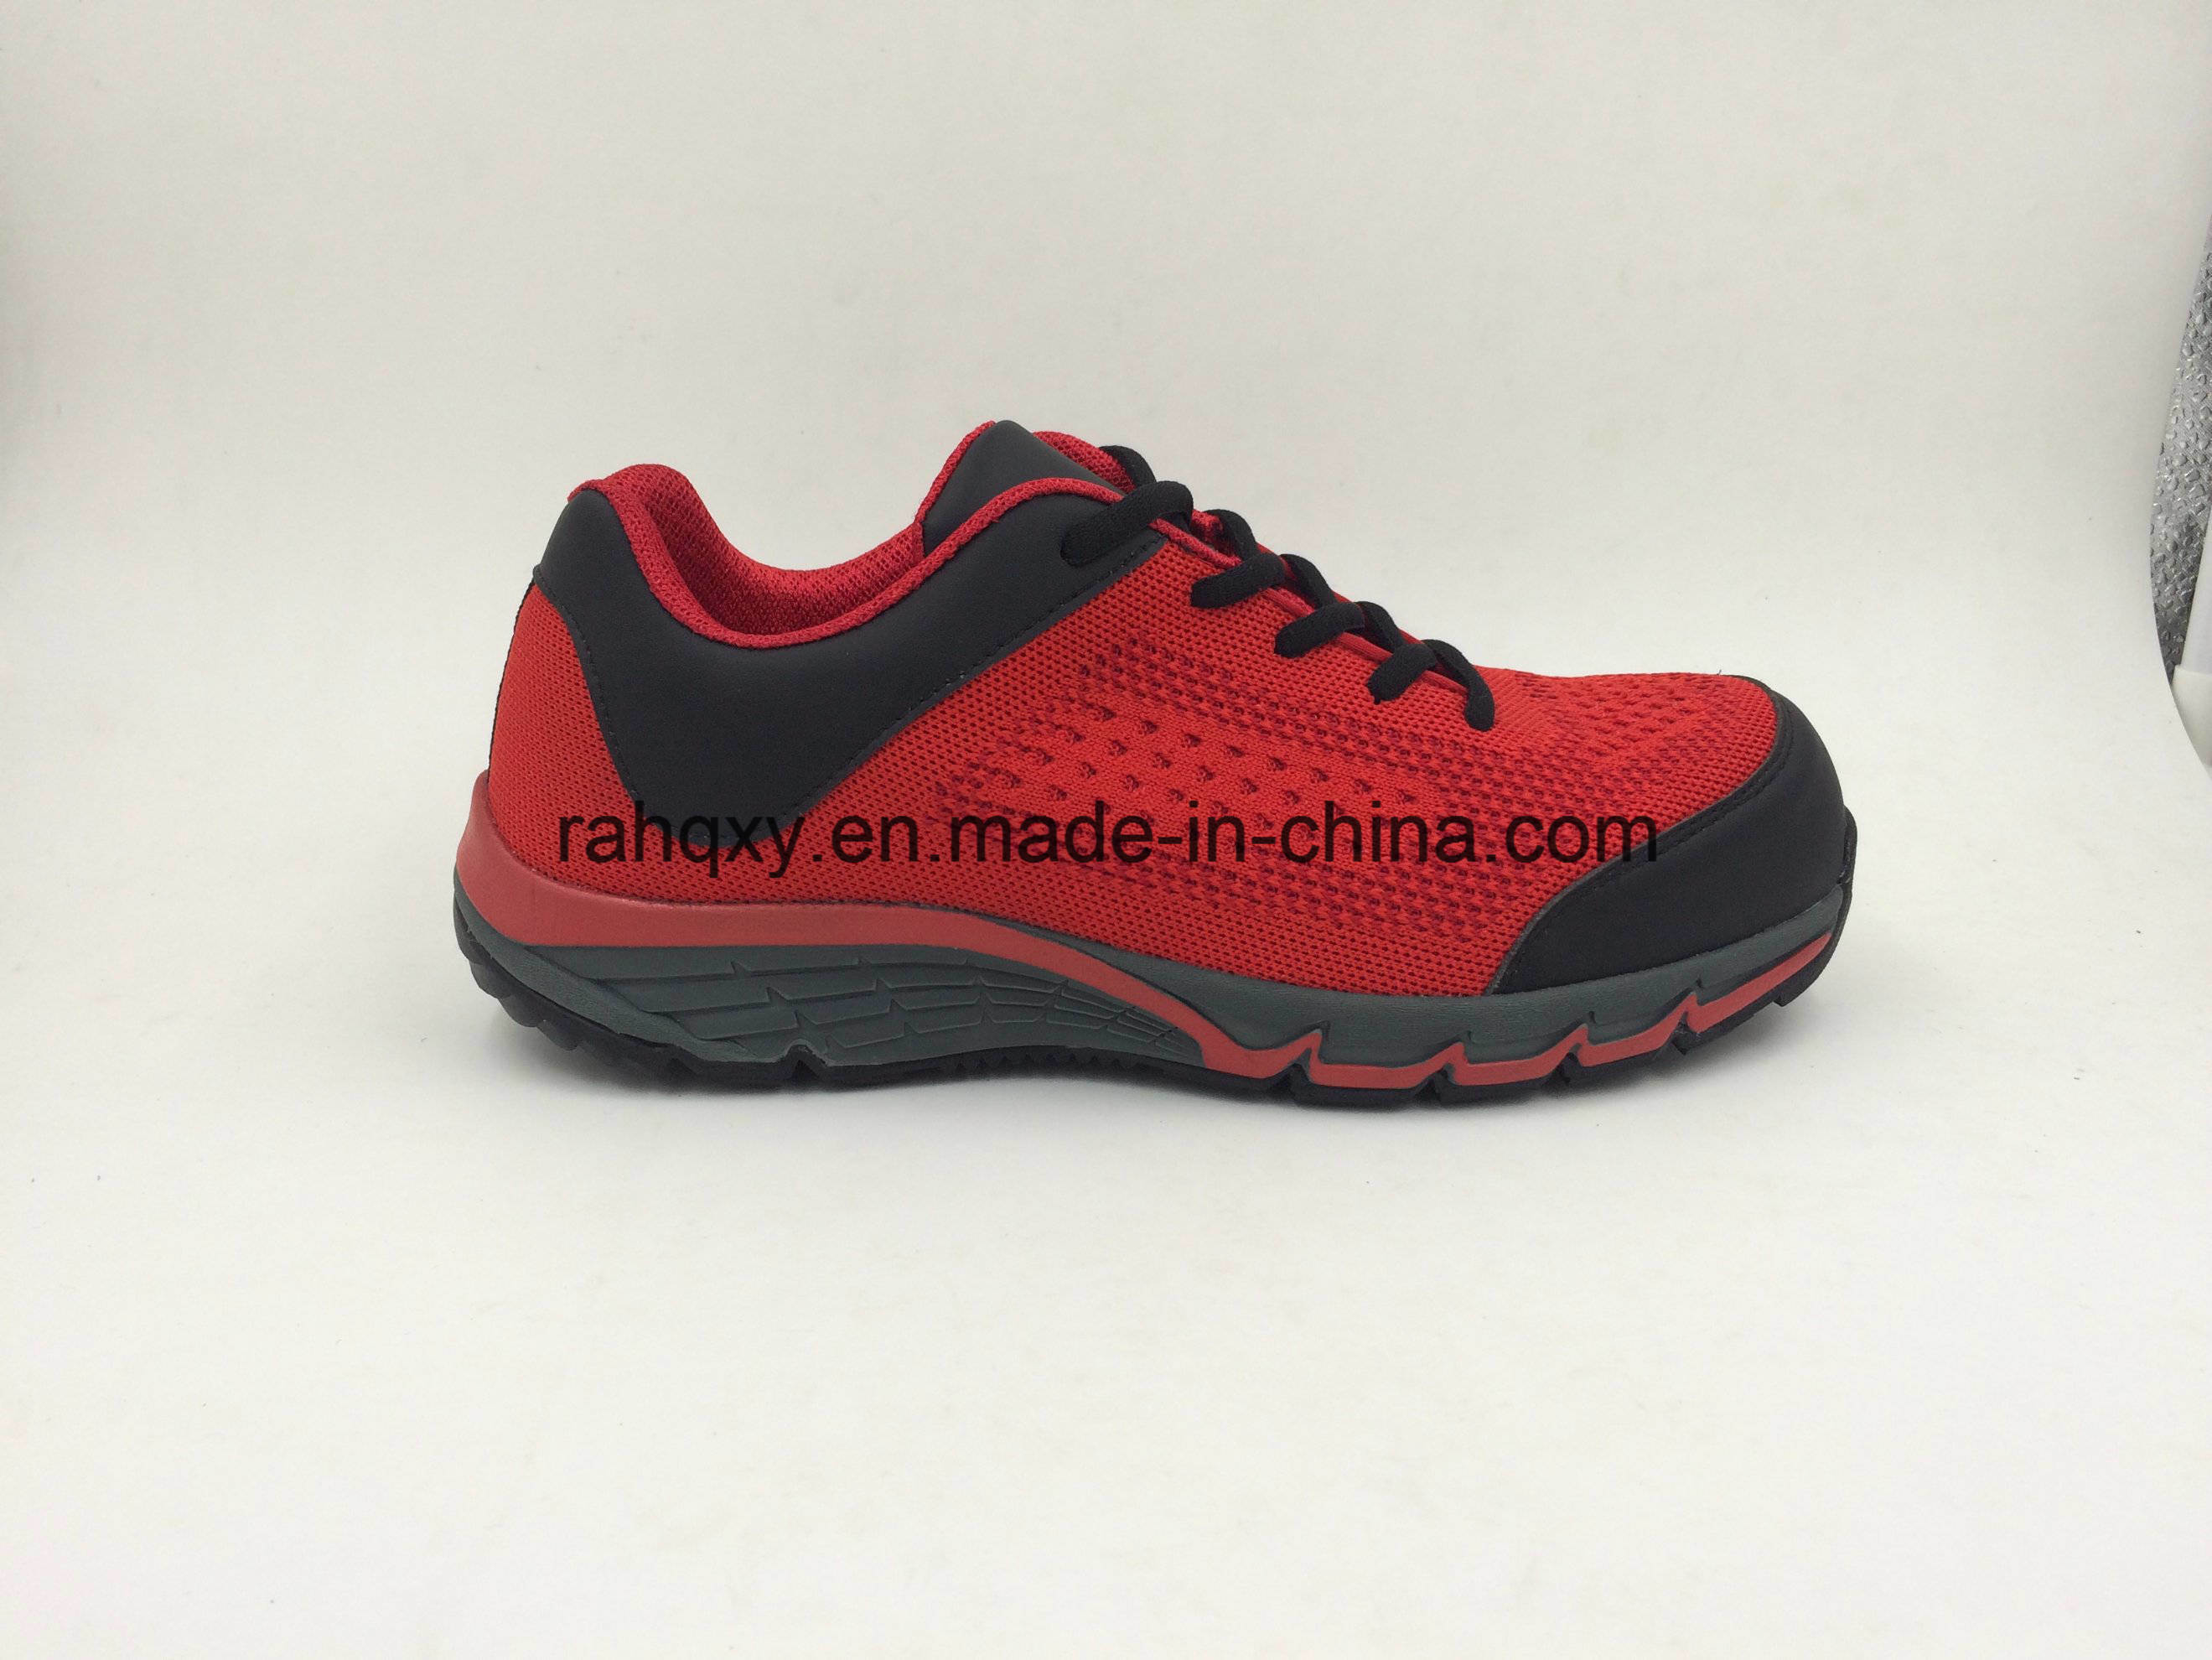 Strong Fabric New Material Flyknit Safety Shoes (16038)